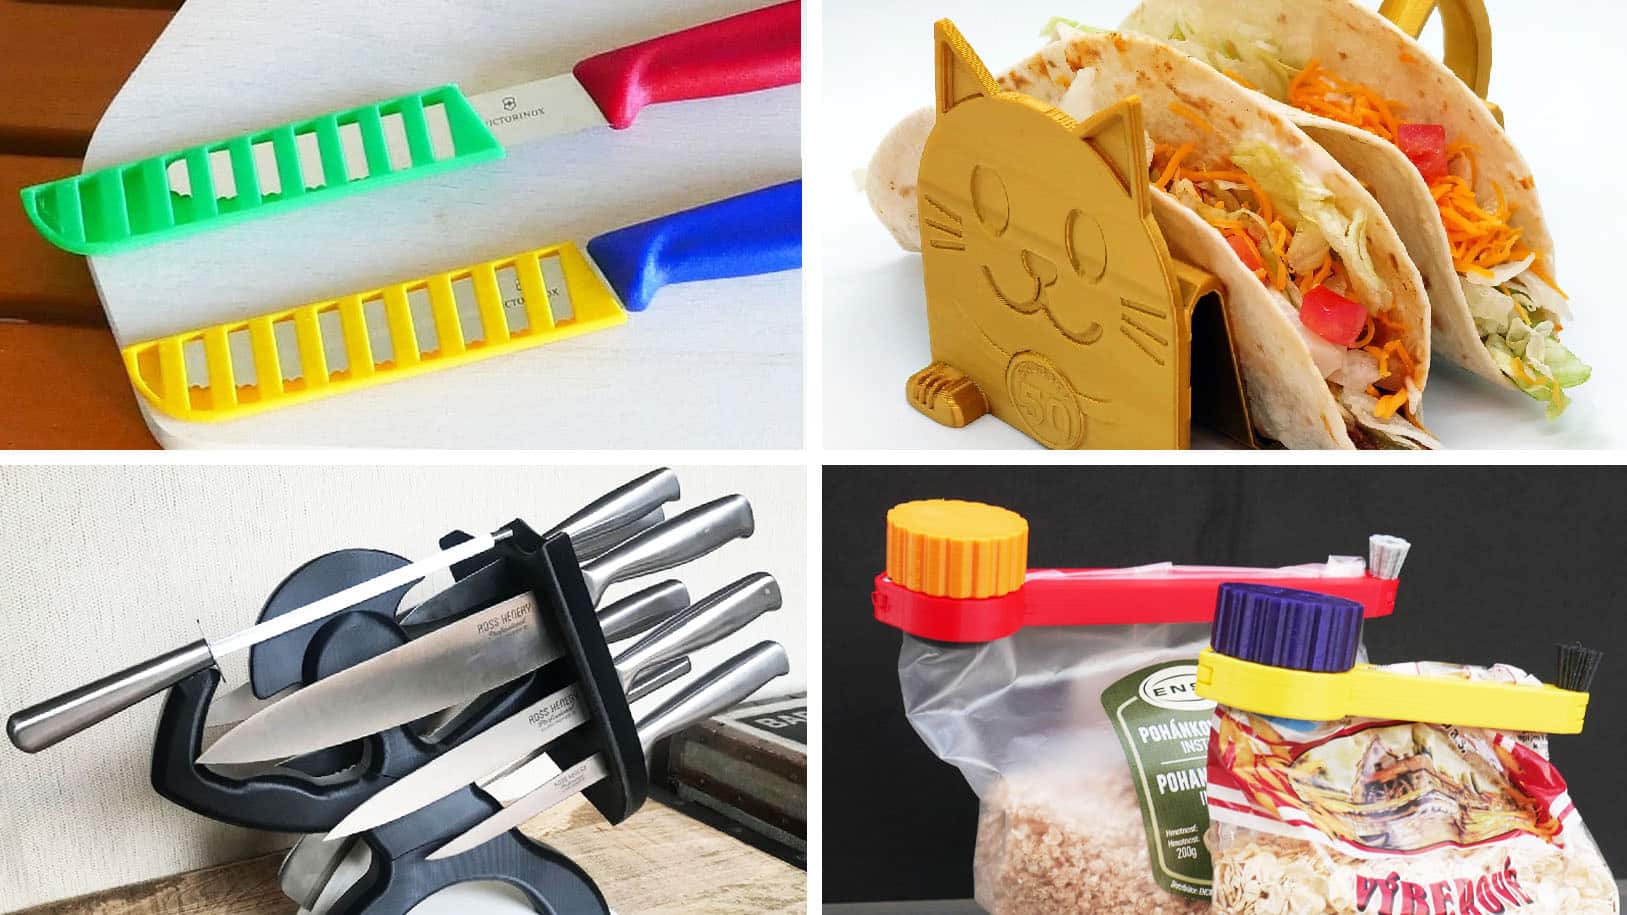 50 Useful 3D Printed Kitchen Gadgets & Tools